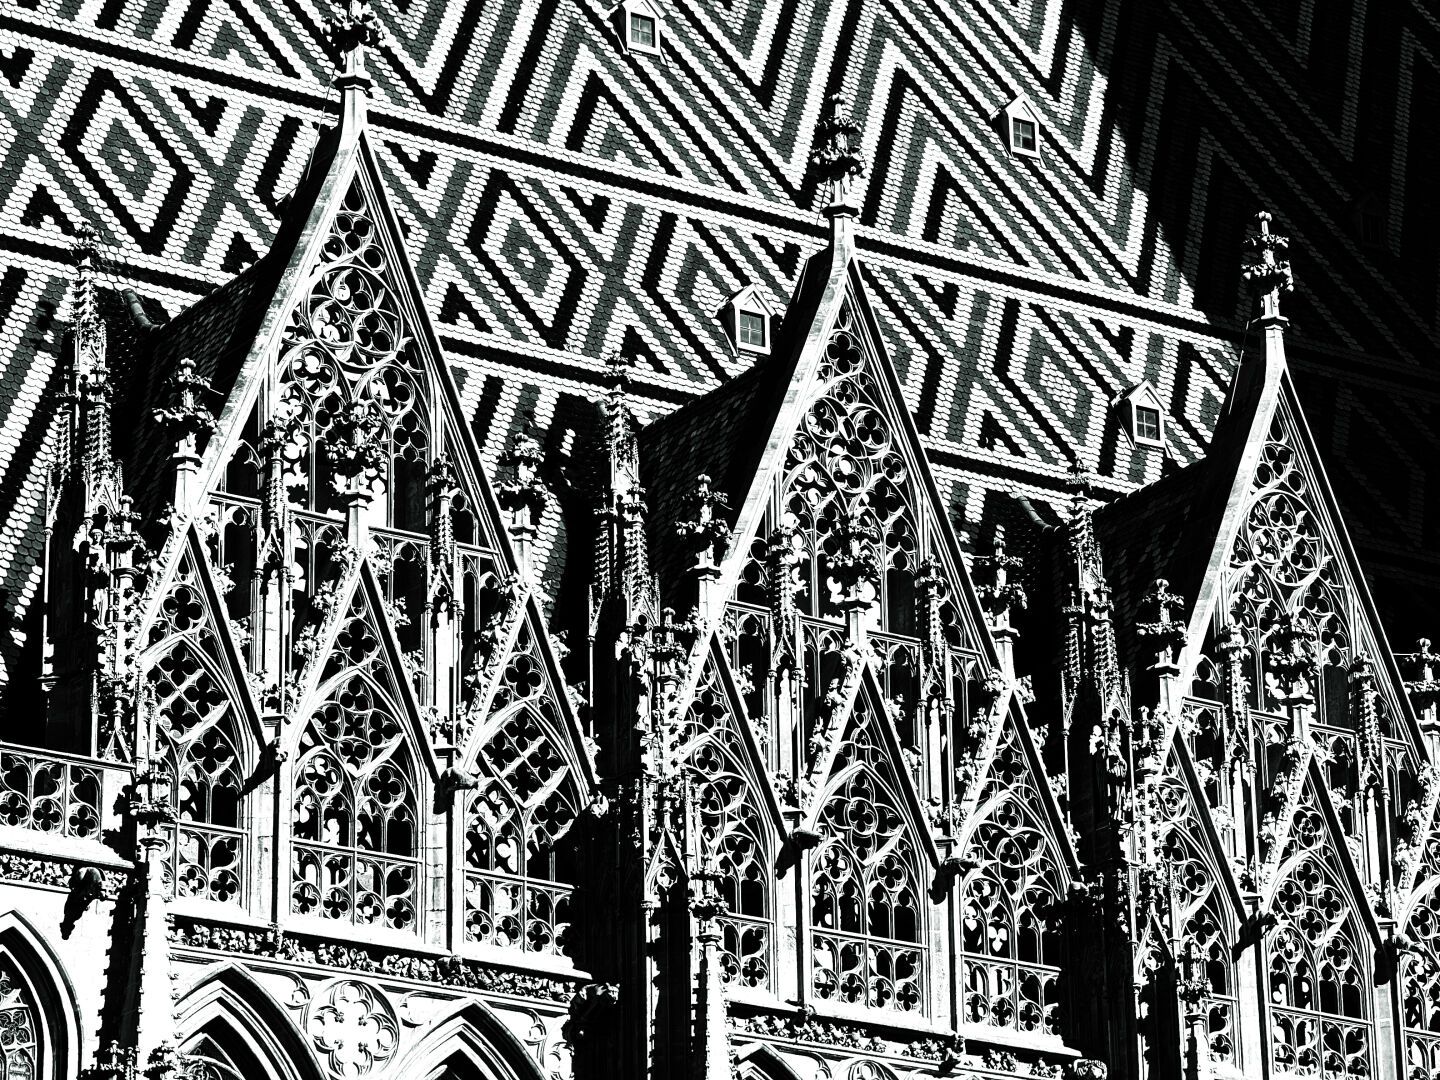 Details from St. Stephen's Cathedral in Vienna

#architecturephotography #blackandwhitephotography #fotomontag #photography